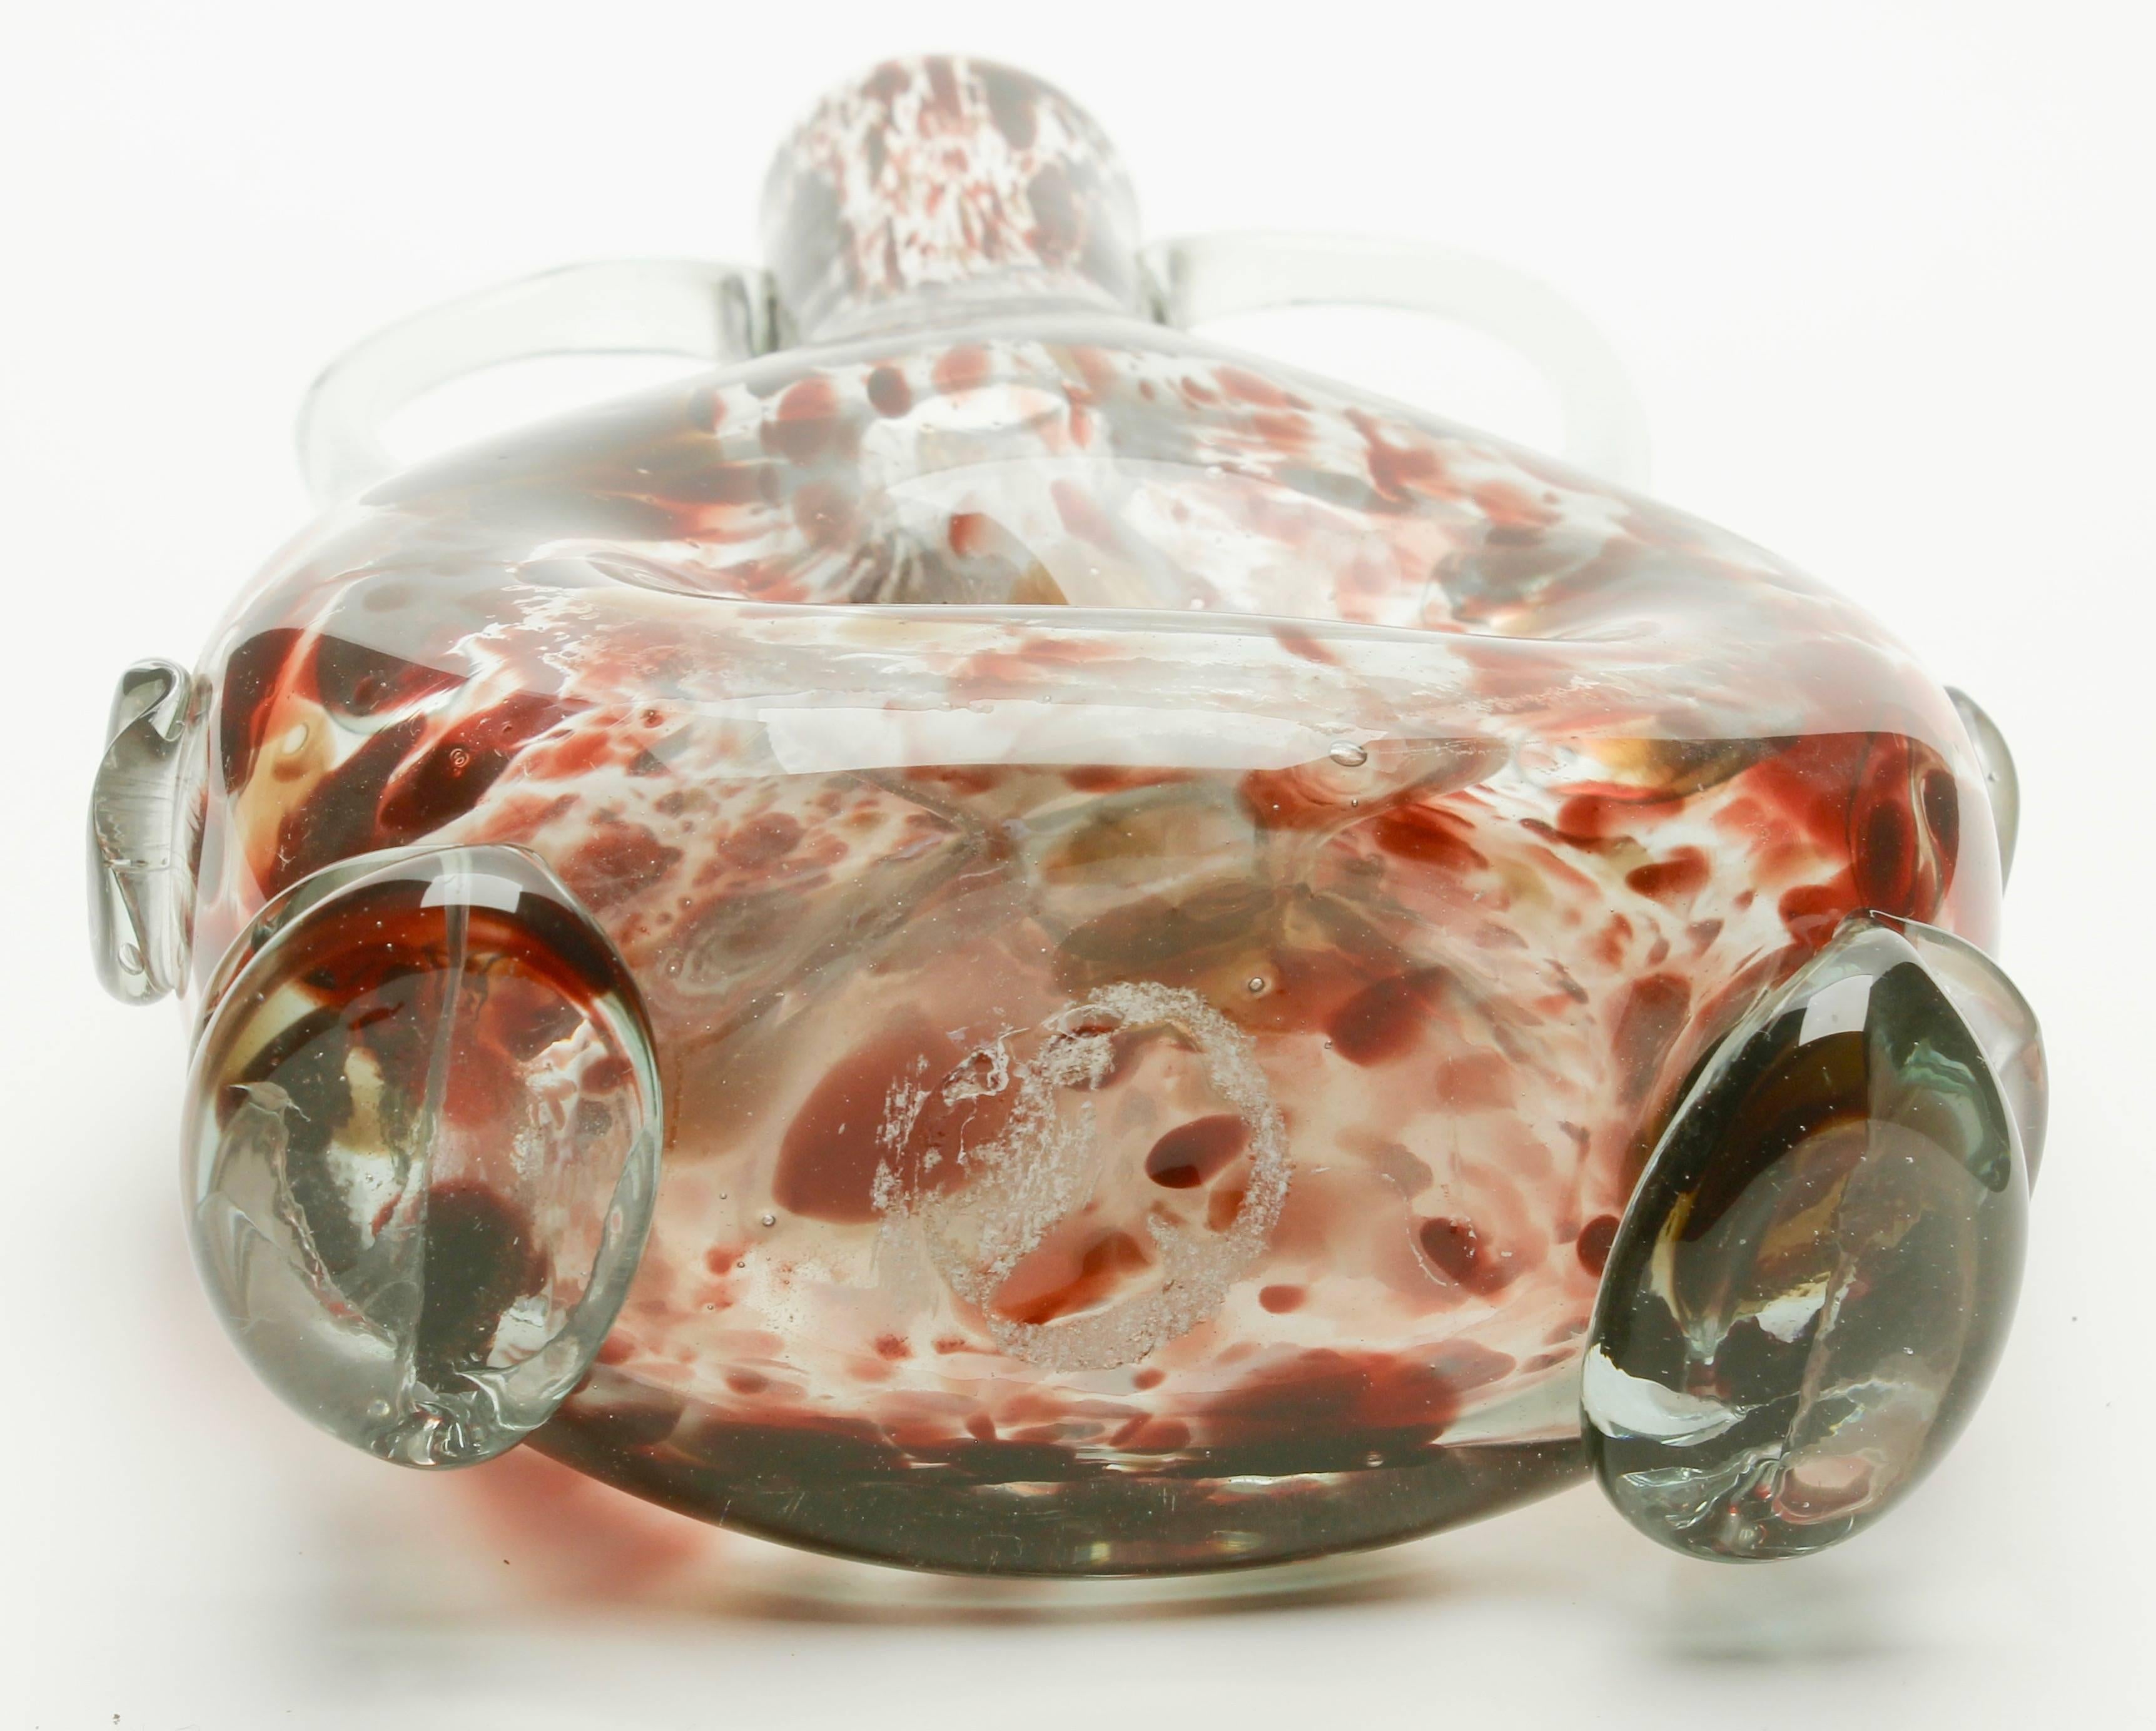 Hand-Crafted Studio Glass Vase Based on a Mouth-Blown Bottle Shape of Tortoiseshell For Sale